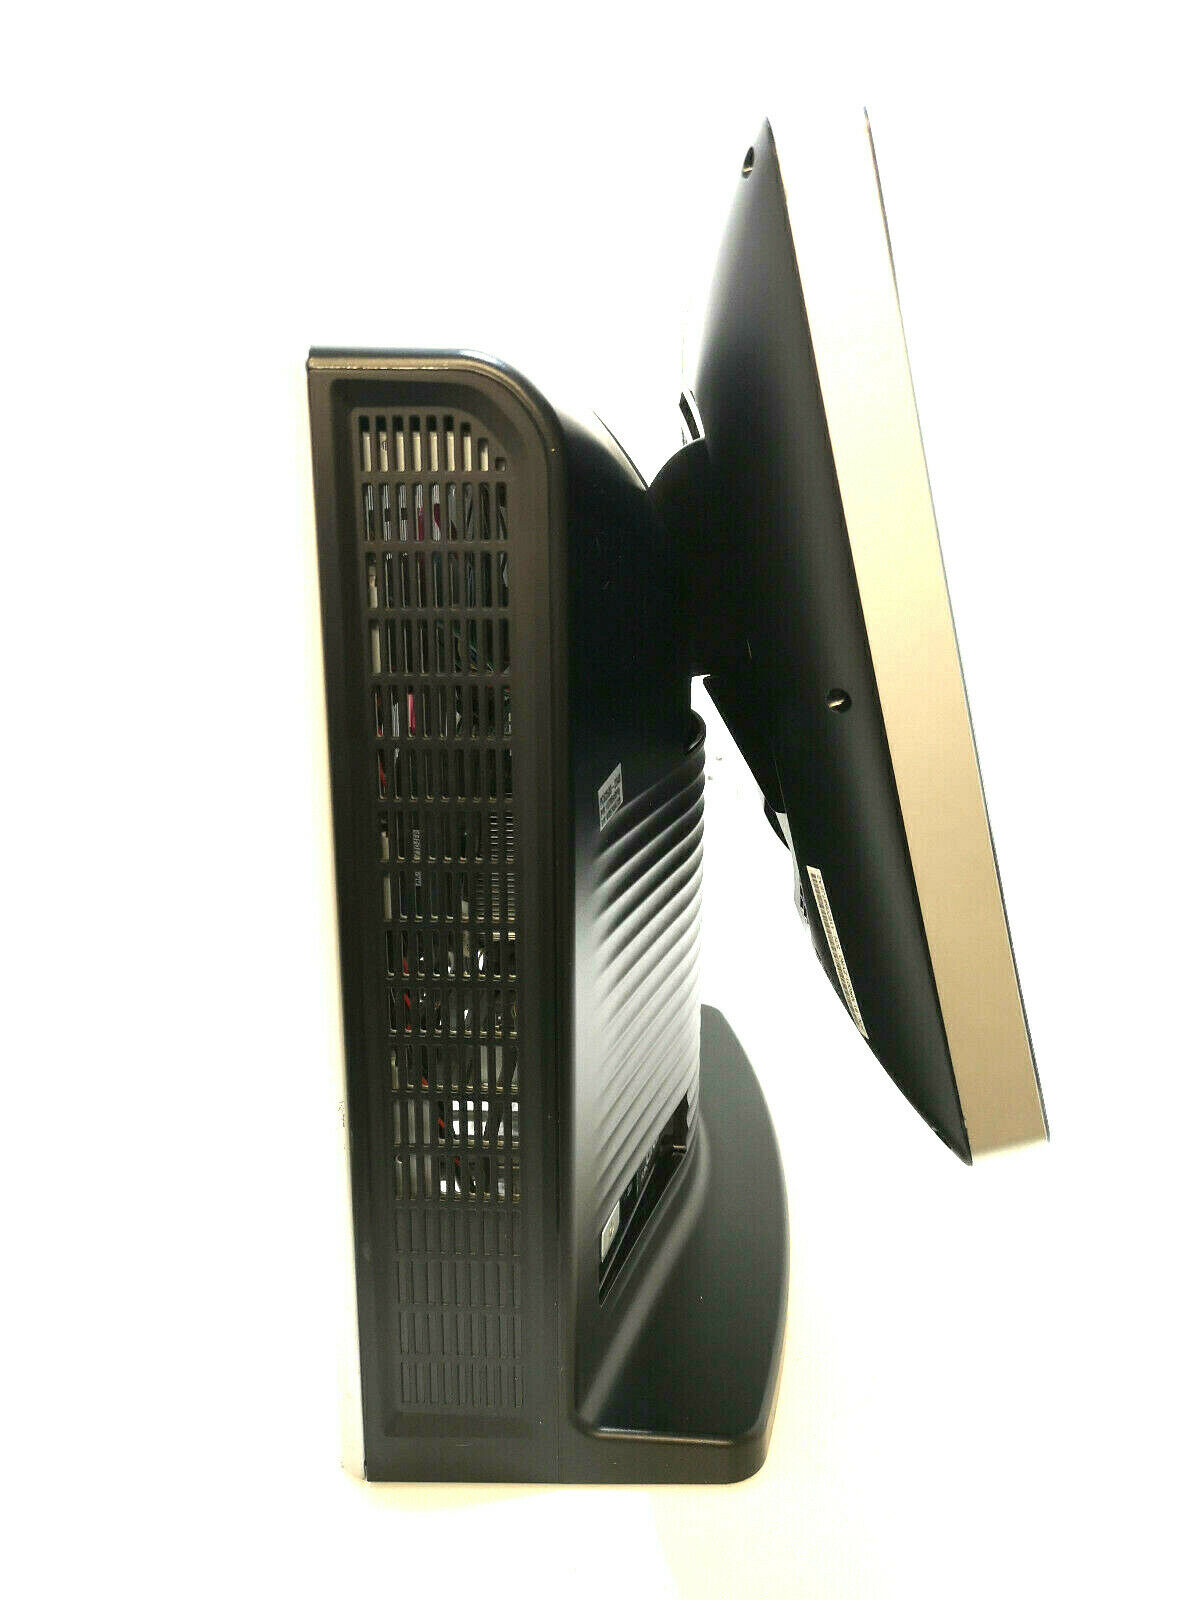 Refurbished RM Ecoquiet 210 Desktop All In One PC